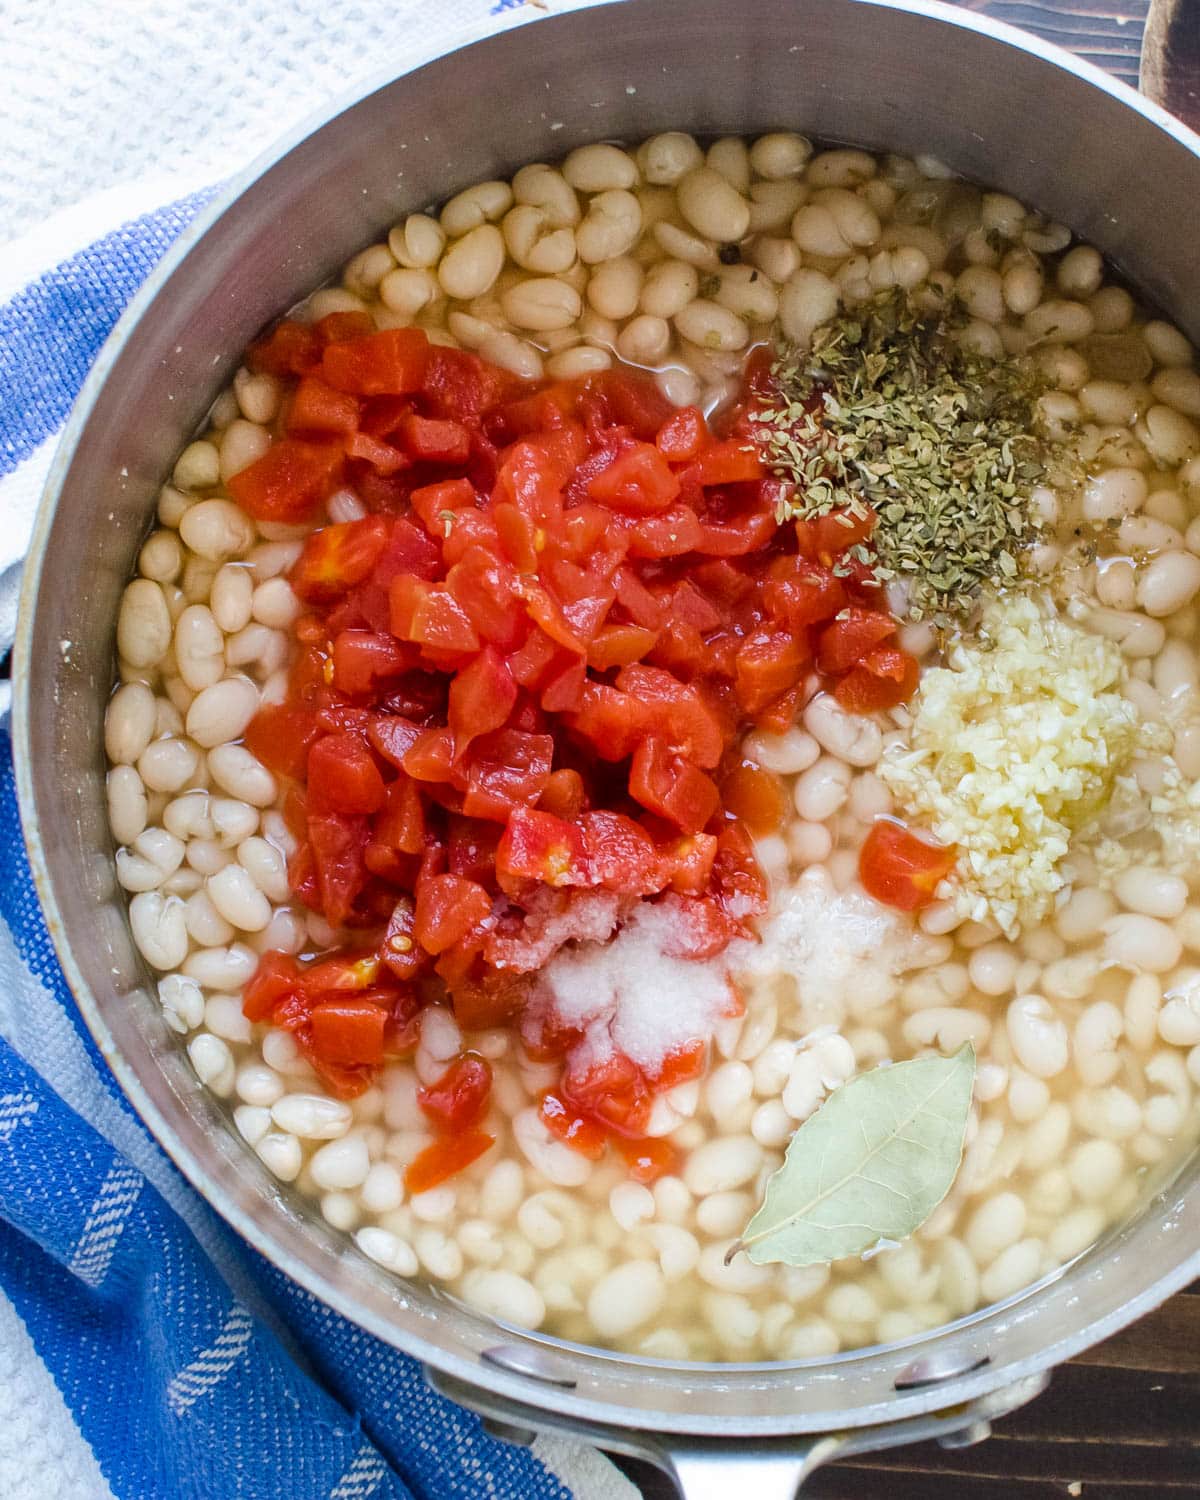 Adding canned tomatoes, garlic and oregano to the white beans.